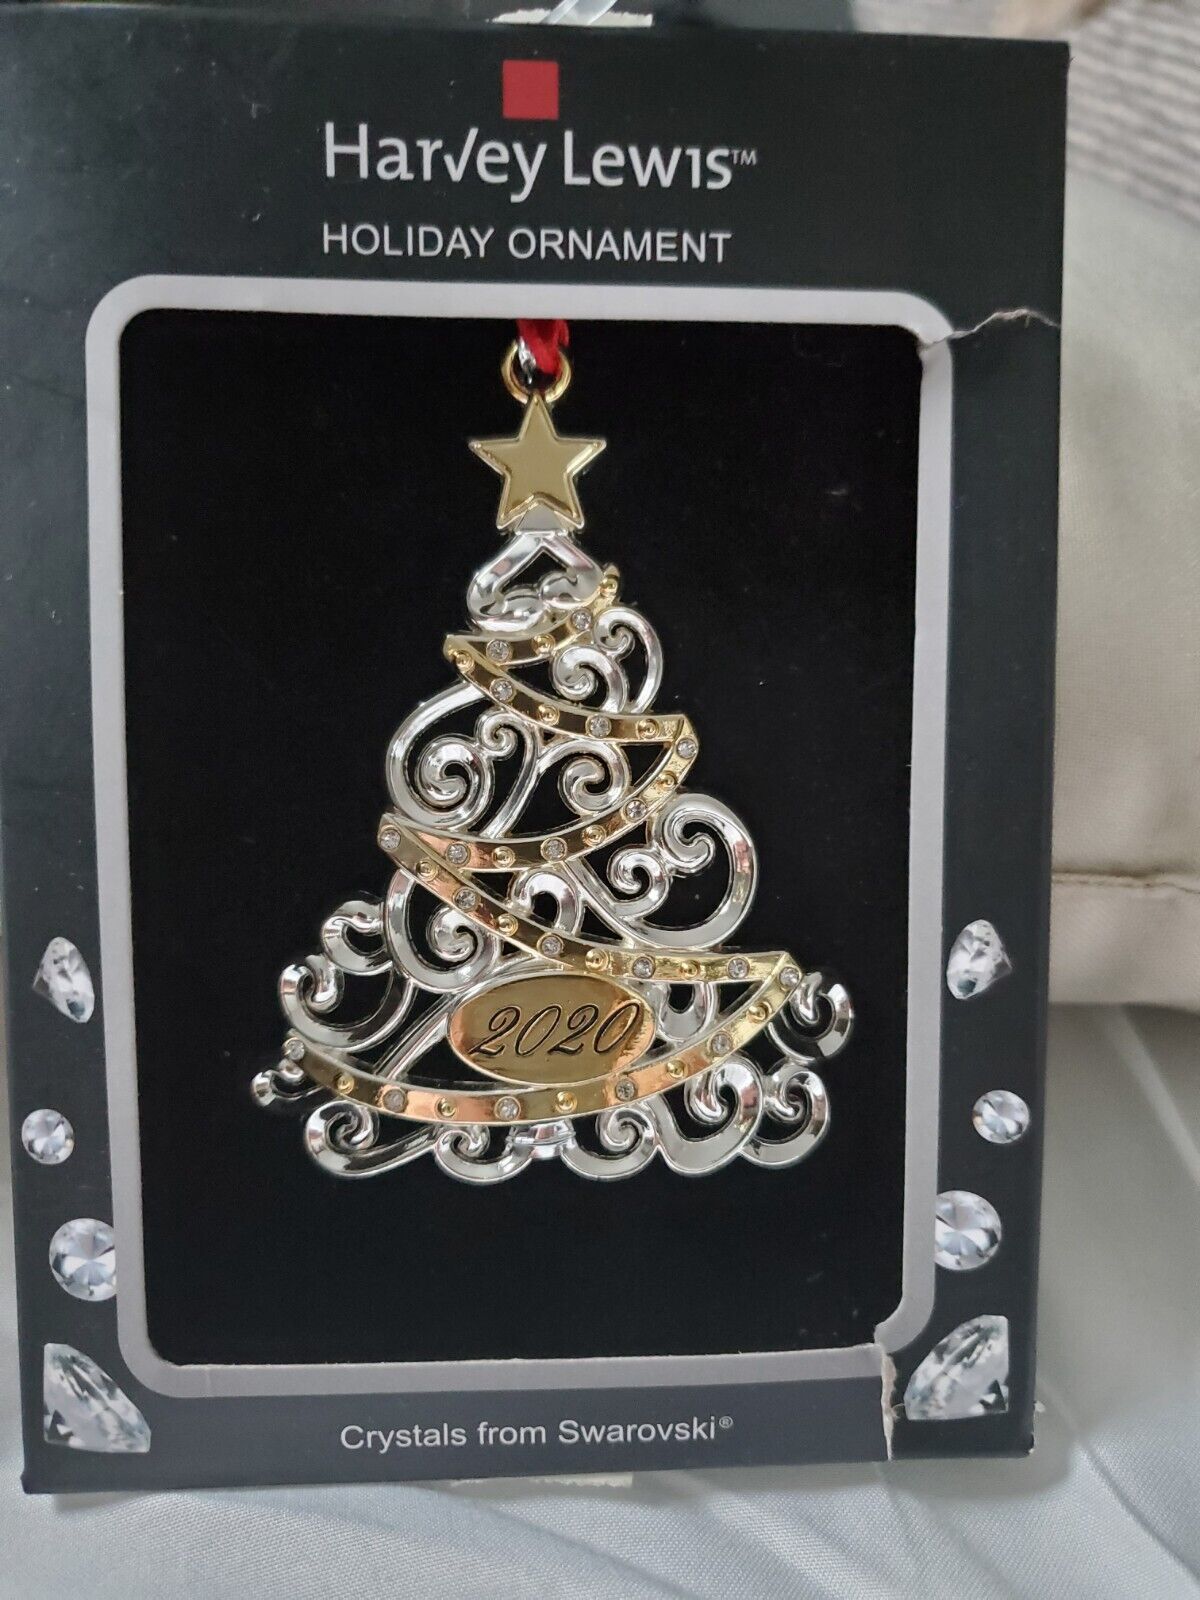 Harvey Lewis  Collection  Swarovski  Crystals  Ornament Tree  With Star 2020